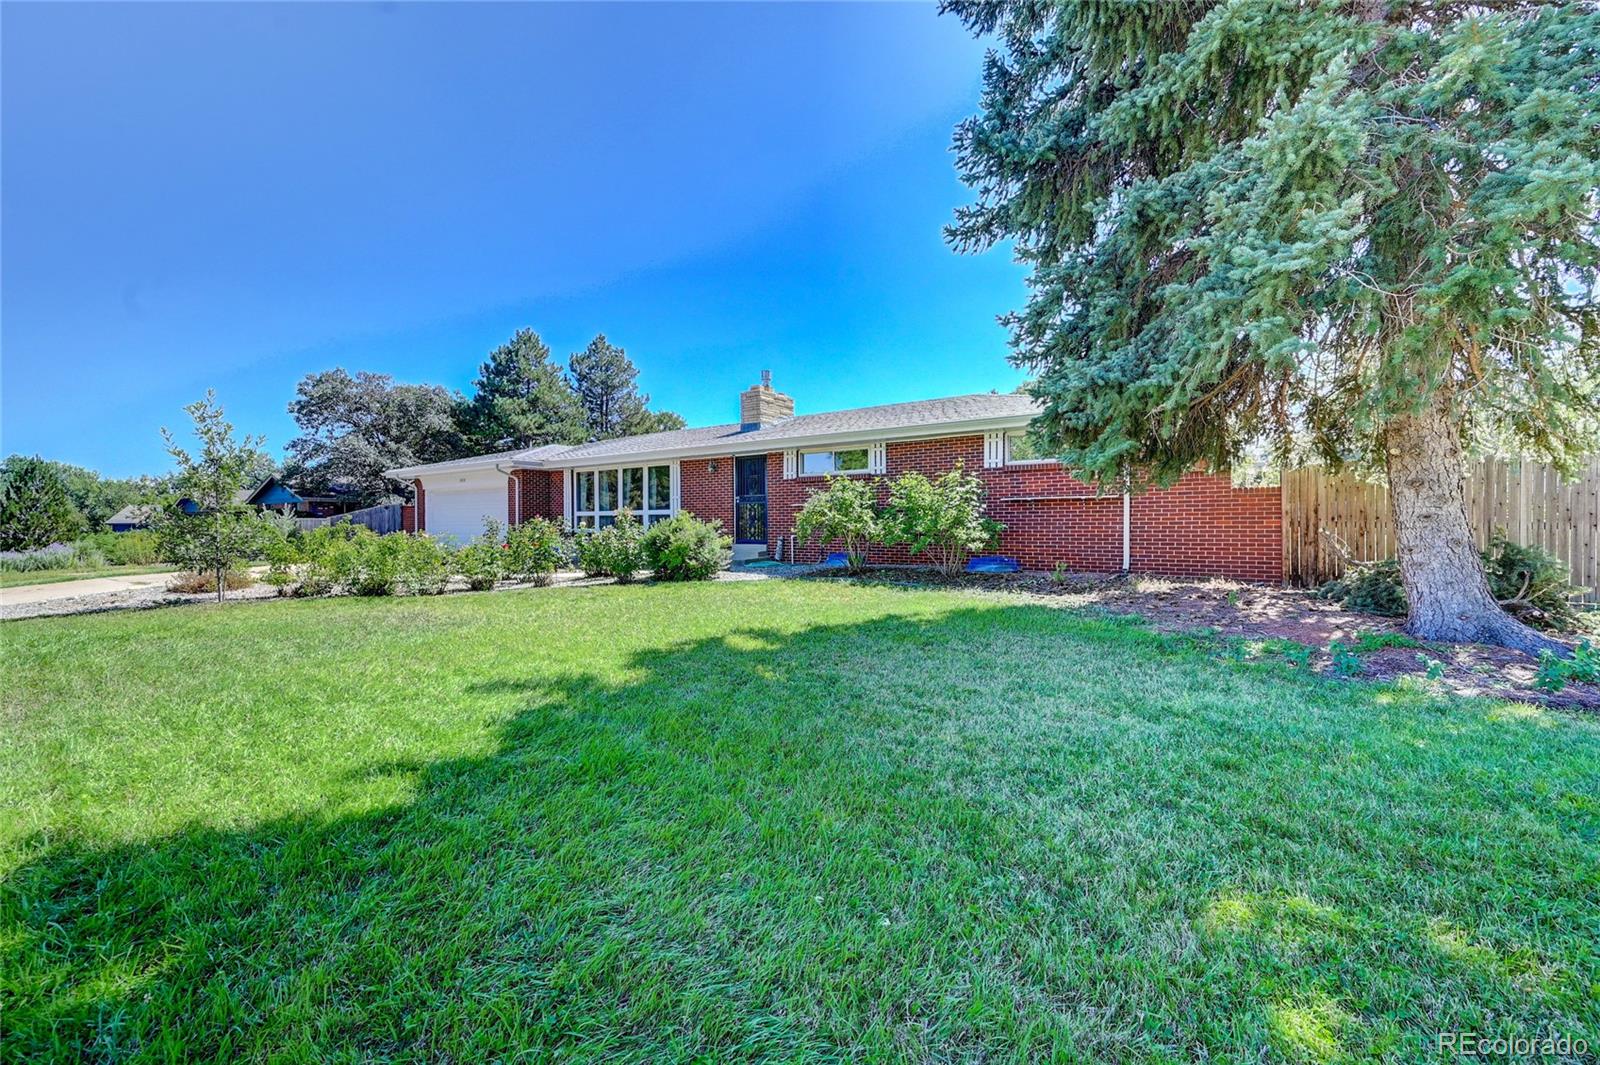 Report Image for 11038 W 82nd Place,Arvada, Colorado